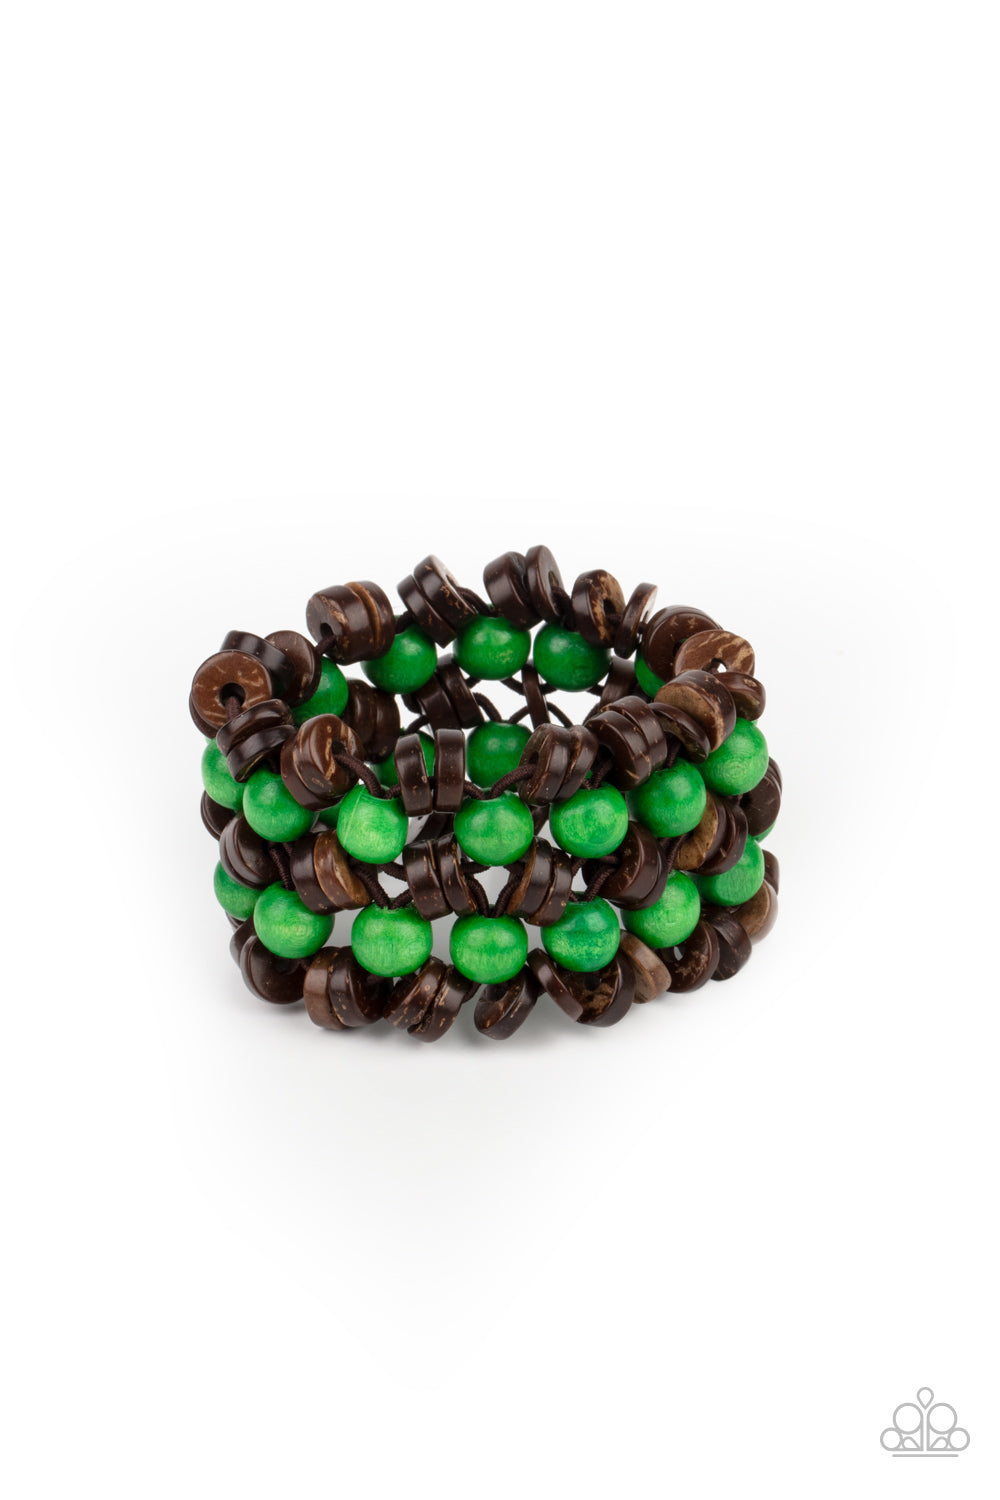 &lt;P&gt;Rows of green wooden beads and brown wooden discs are threaded along stretchy bands that decoratively weave around the wrist, creating a tropical inspired statement piece. &lt;/P&gt;

&lt;P&gt;&lt;I&gt; Sold as one individual bracelet. &lt;/I&gt;&lt;/p&gt;


&lt;img src=\&quot;https://d9b54x484lq62.cloudfront.net/paparazzi/shopping/images/517_tag150x115_1.png\&quot; alt=\&quot;New Kit\&quot; align=\&quot;middle\&quot; height=\&quot;50\&quot; width=\&quot;50\&quot;/&gt;